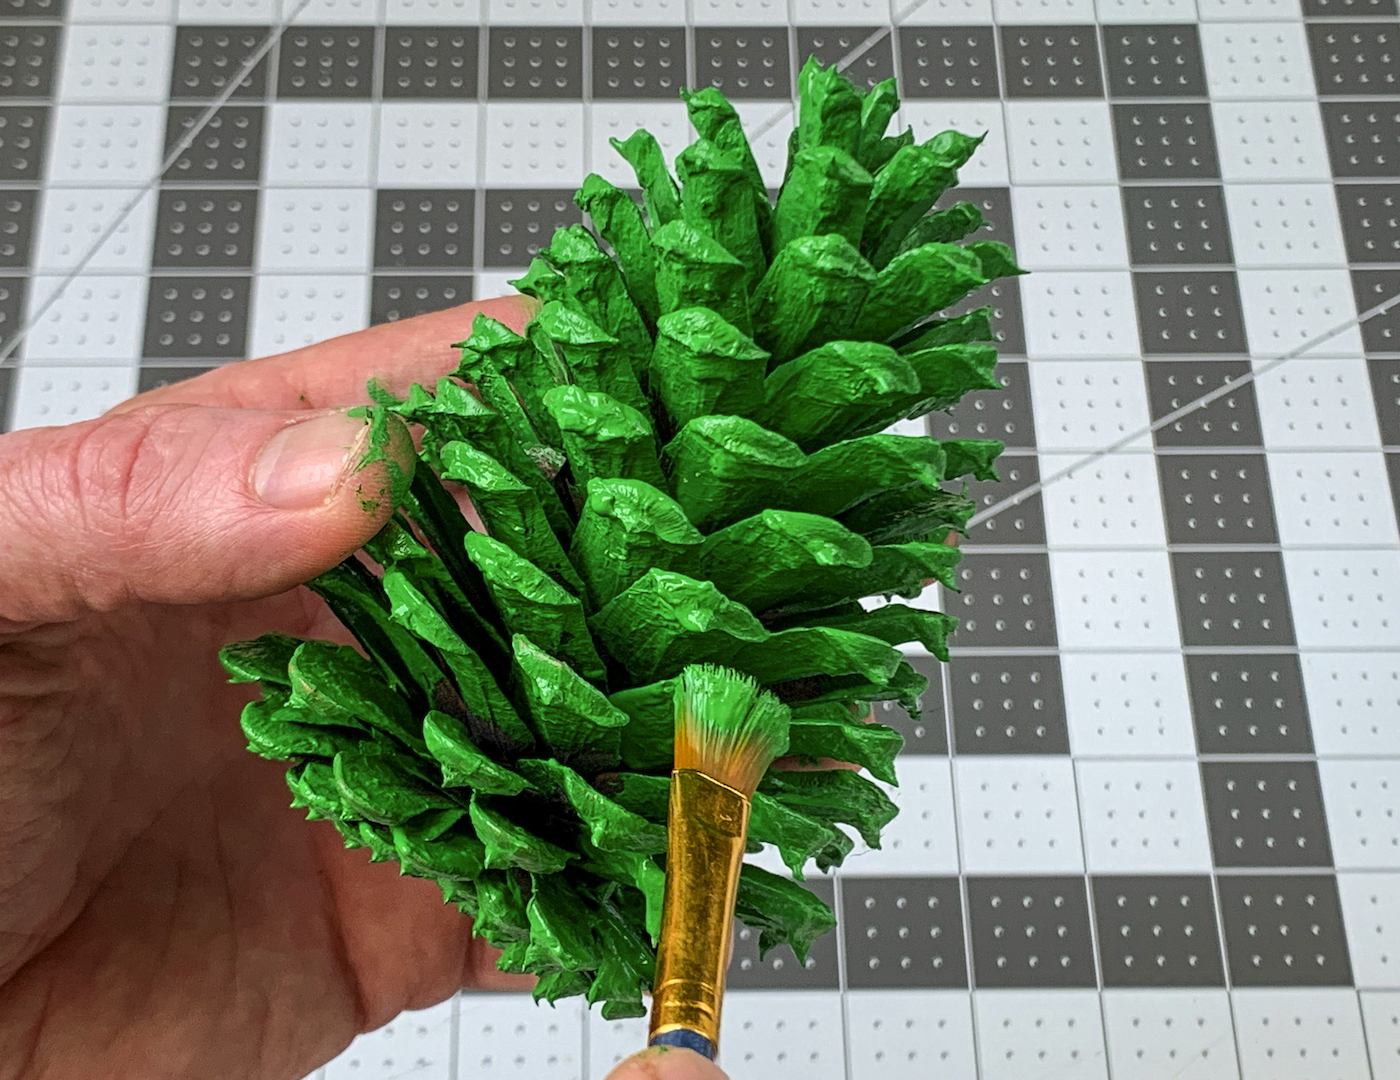 Touching up the pine cone with green paint